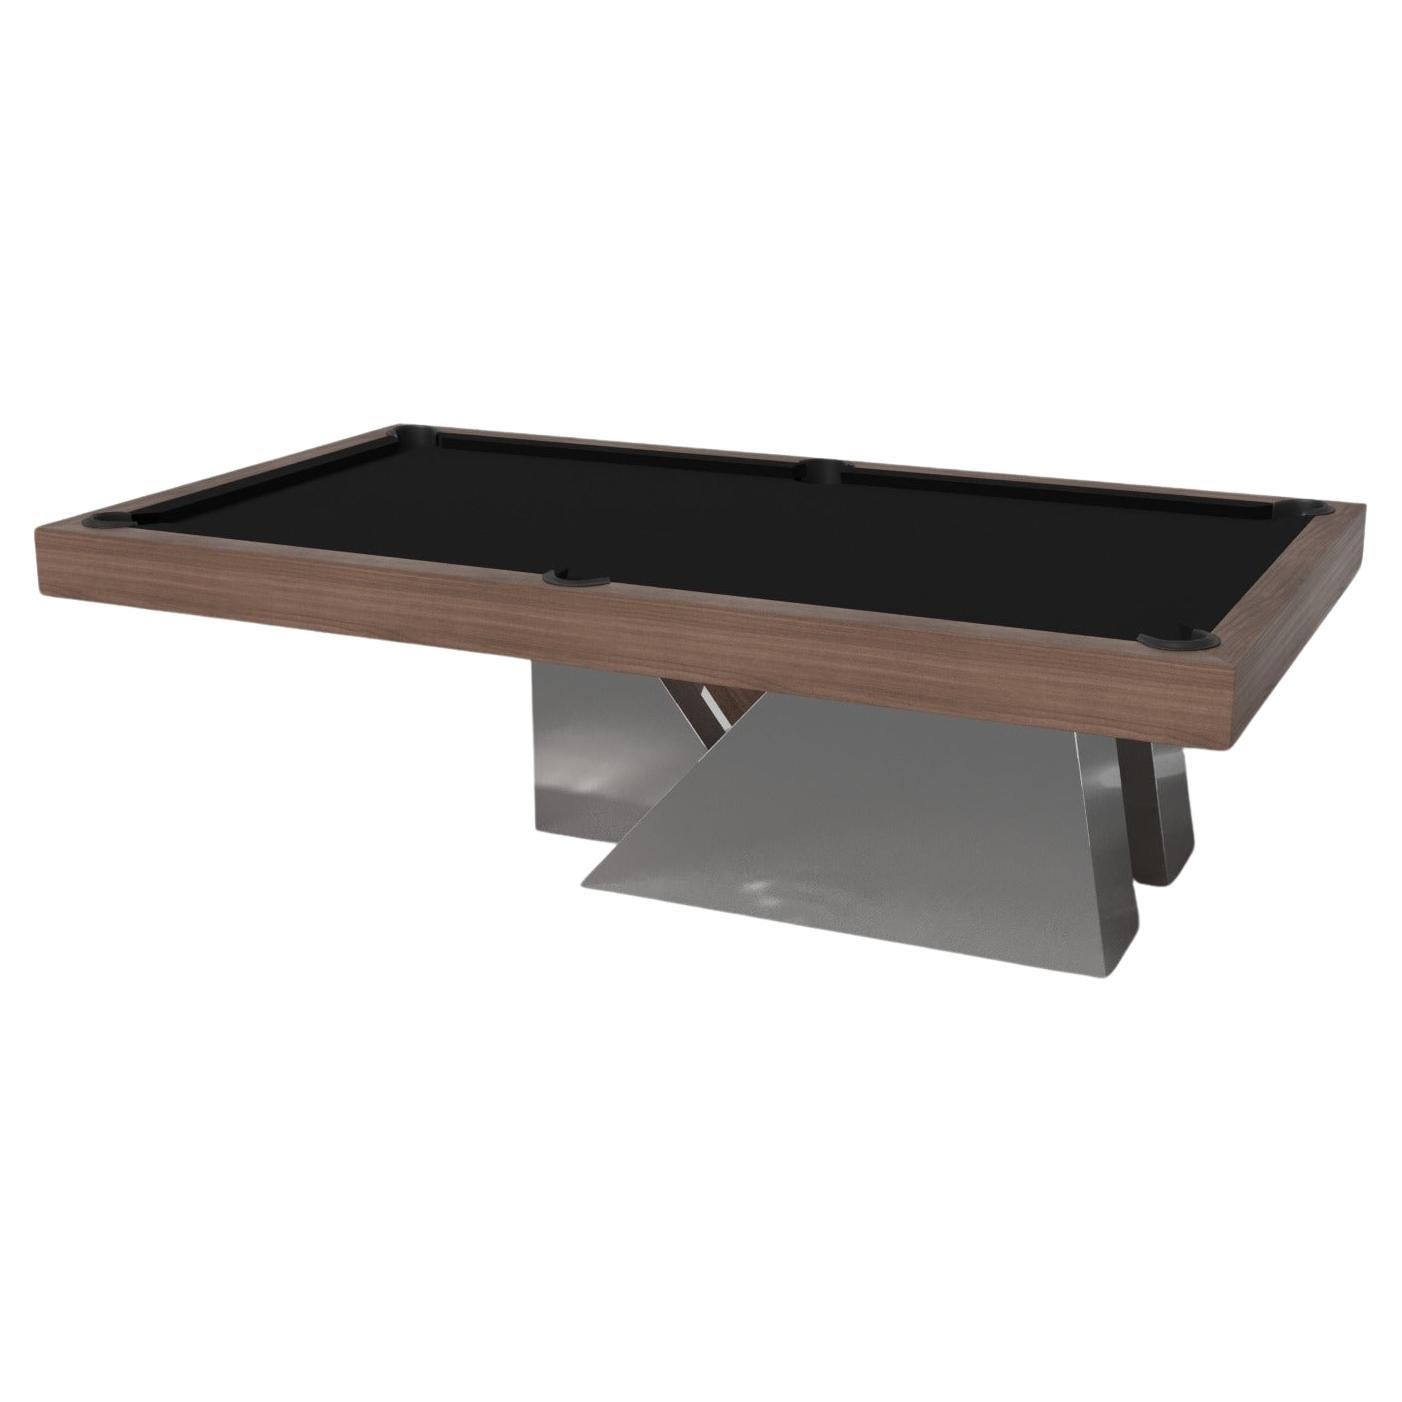 Elevate Customs Stilt Pool Table / Solid Walnut Wood in 8.5' - Made in USA